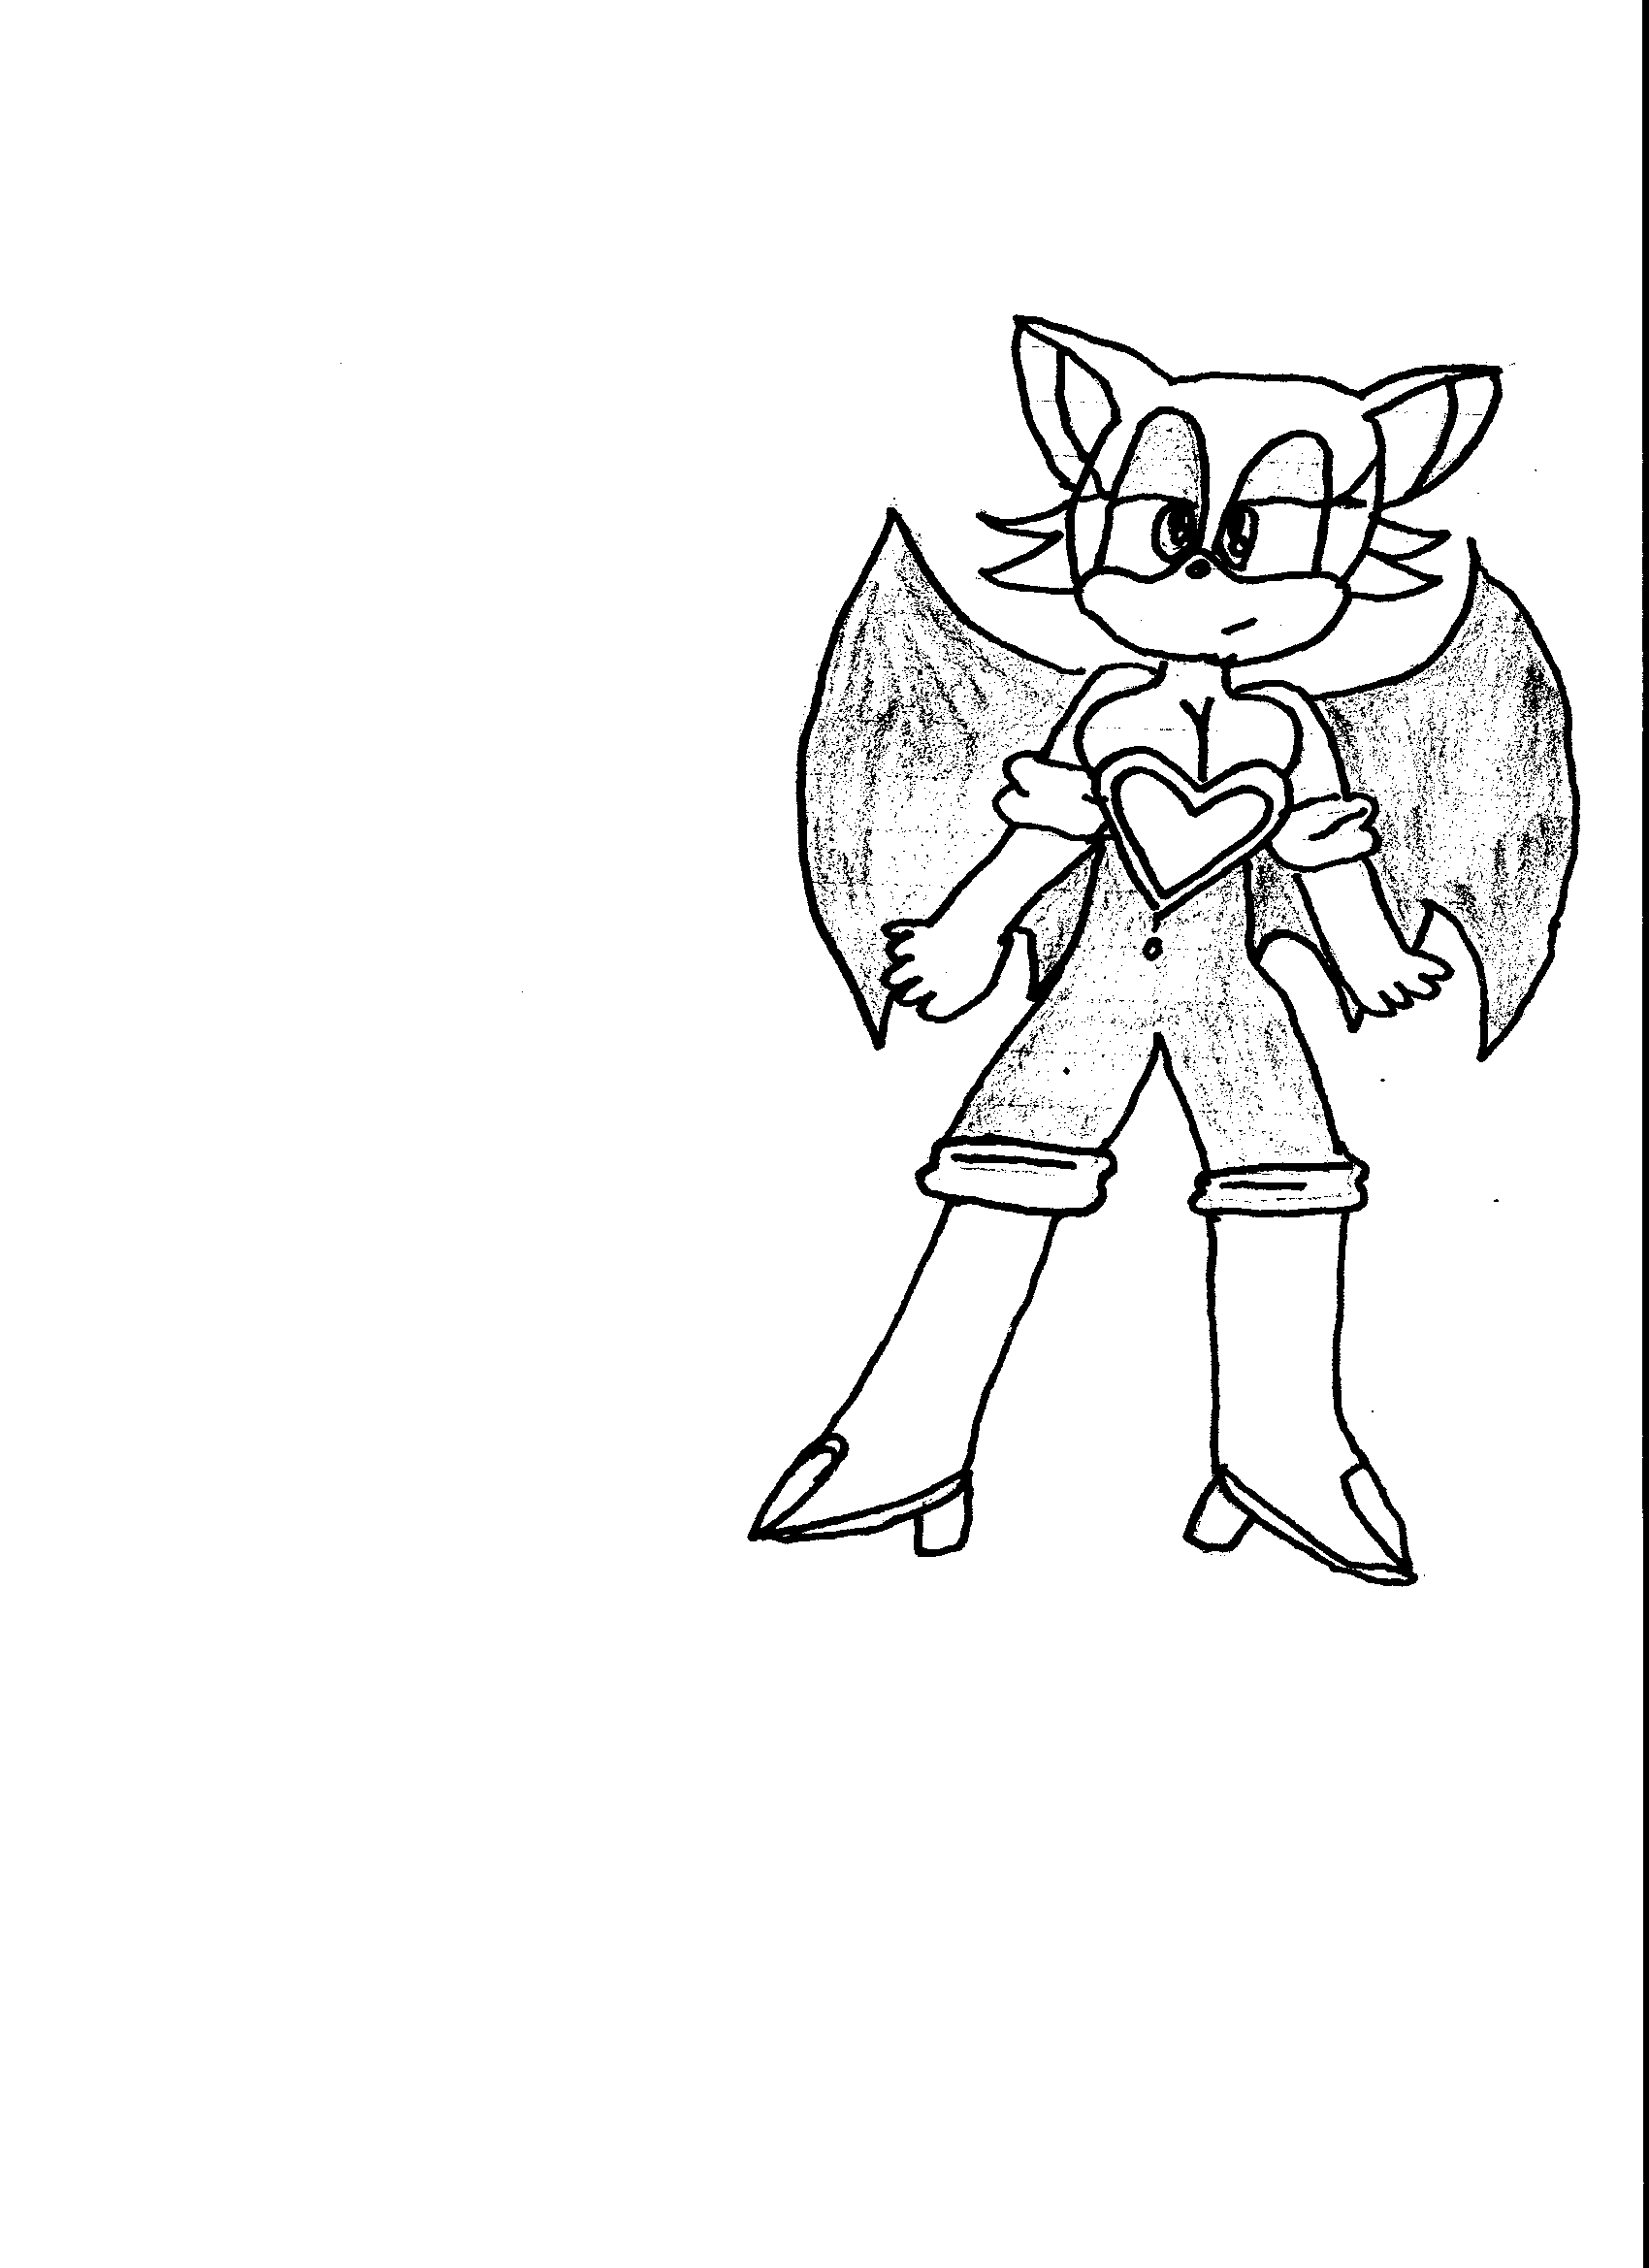 My first drawing of Rouge by MeRocker2890